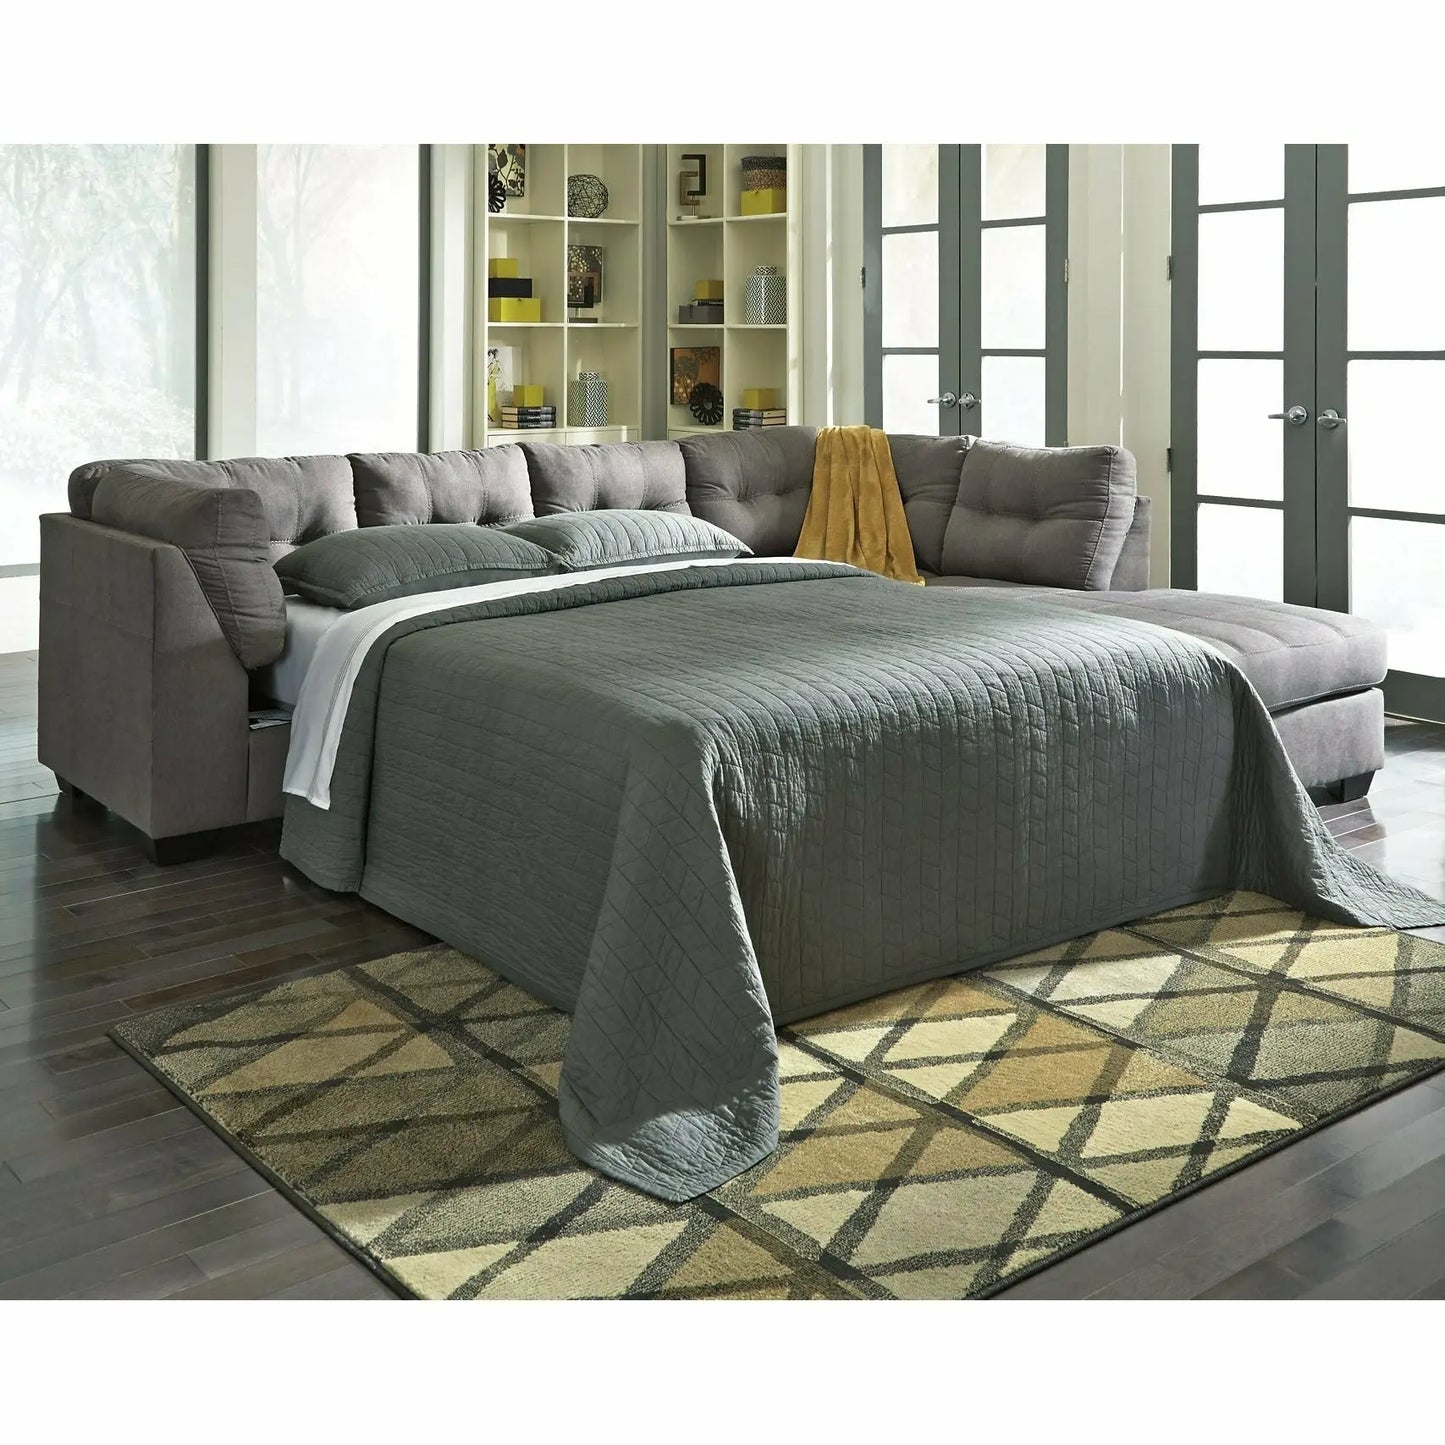 Maier 2-Piece Sleeper Sectional with Chaise SOFA